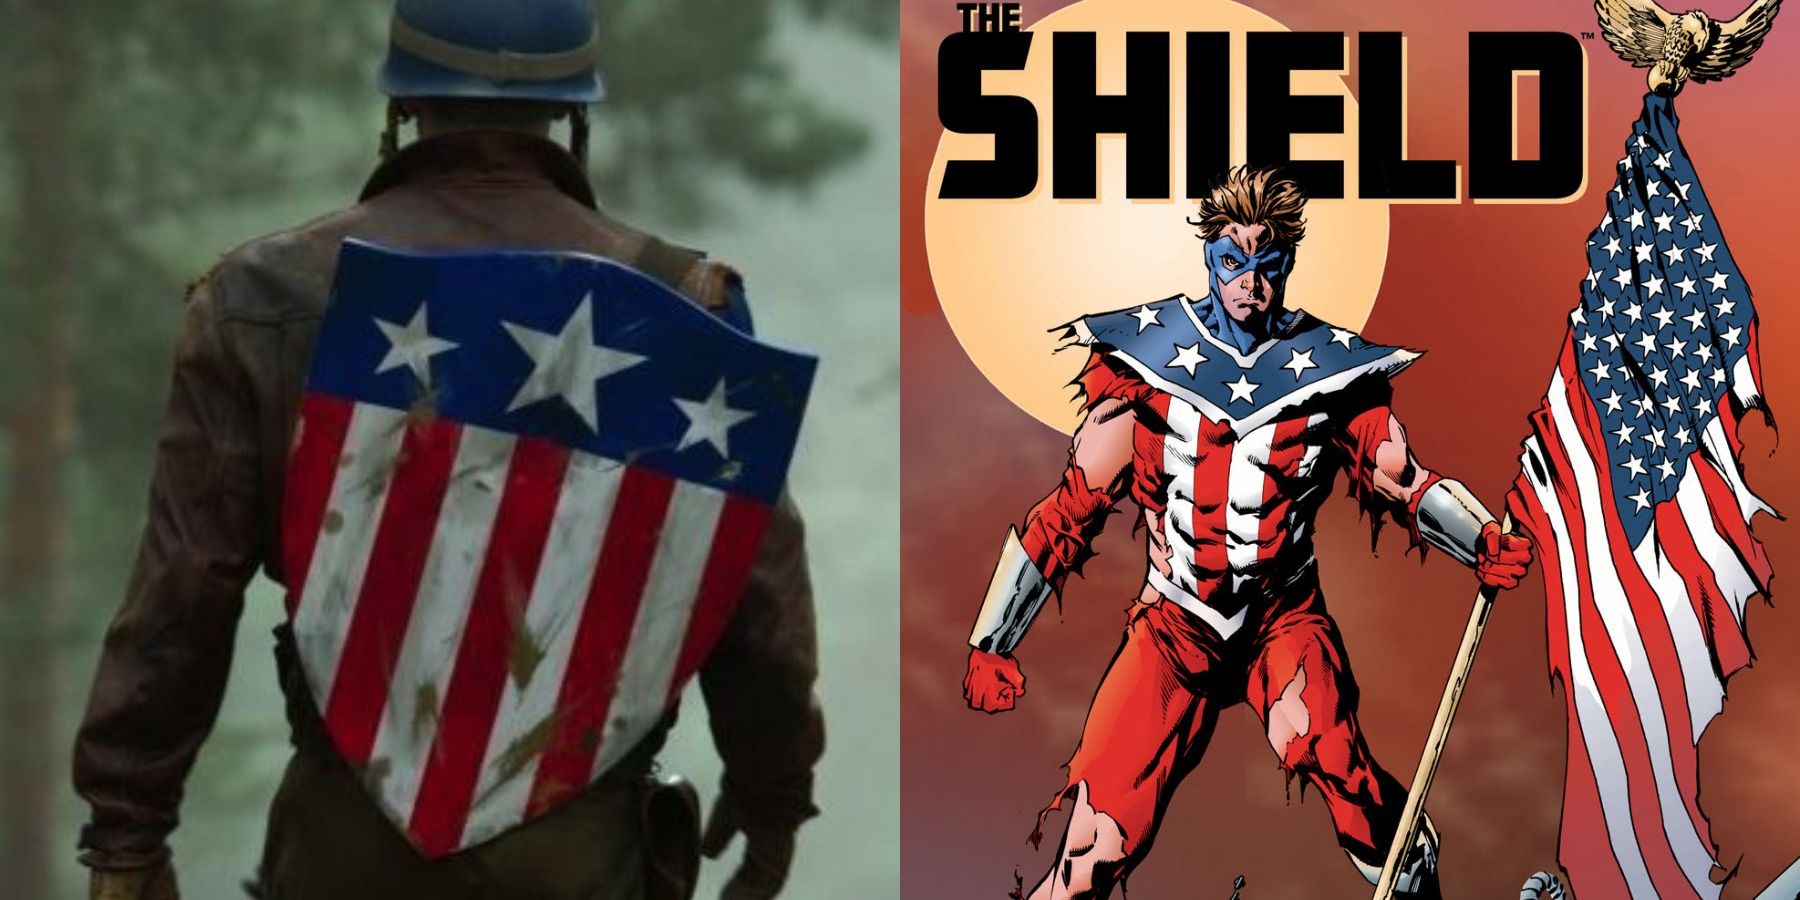 The Shield and Caps shield